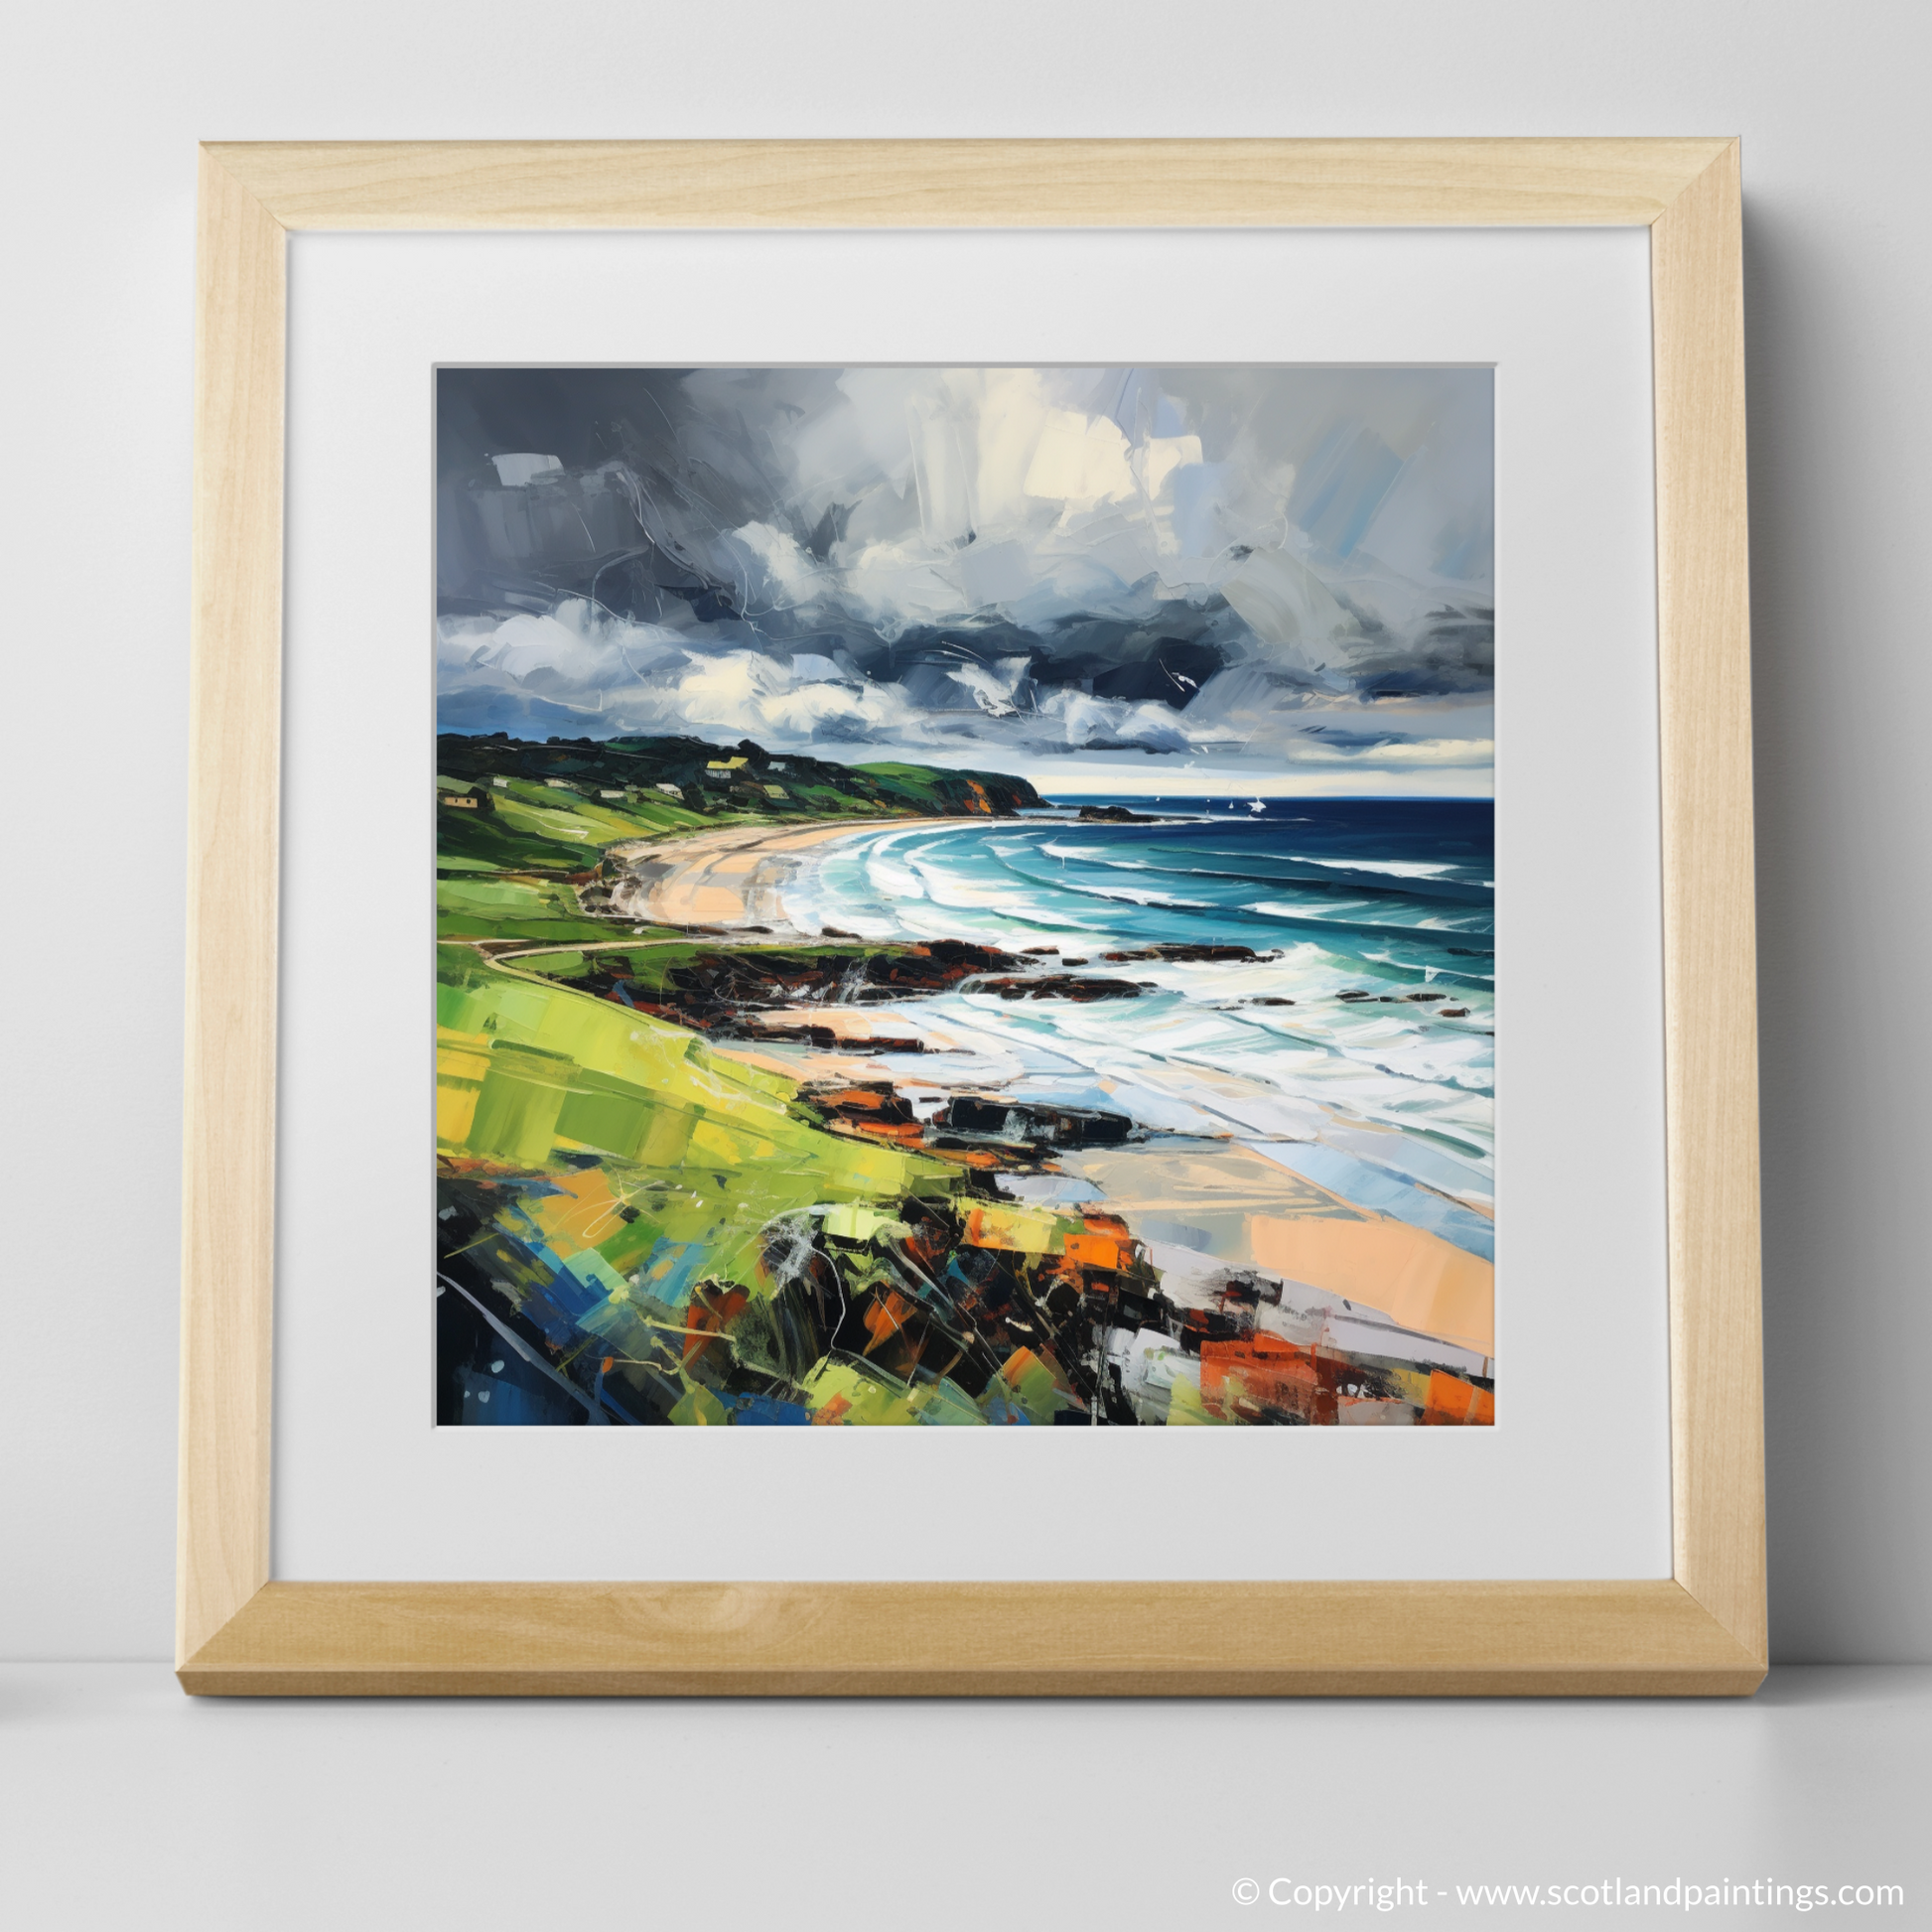 Art Print of Coldingham Bay with a stormy sky with a natural frame